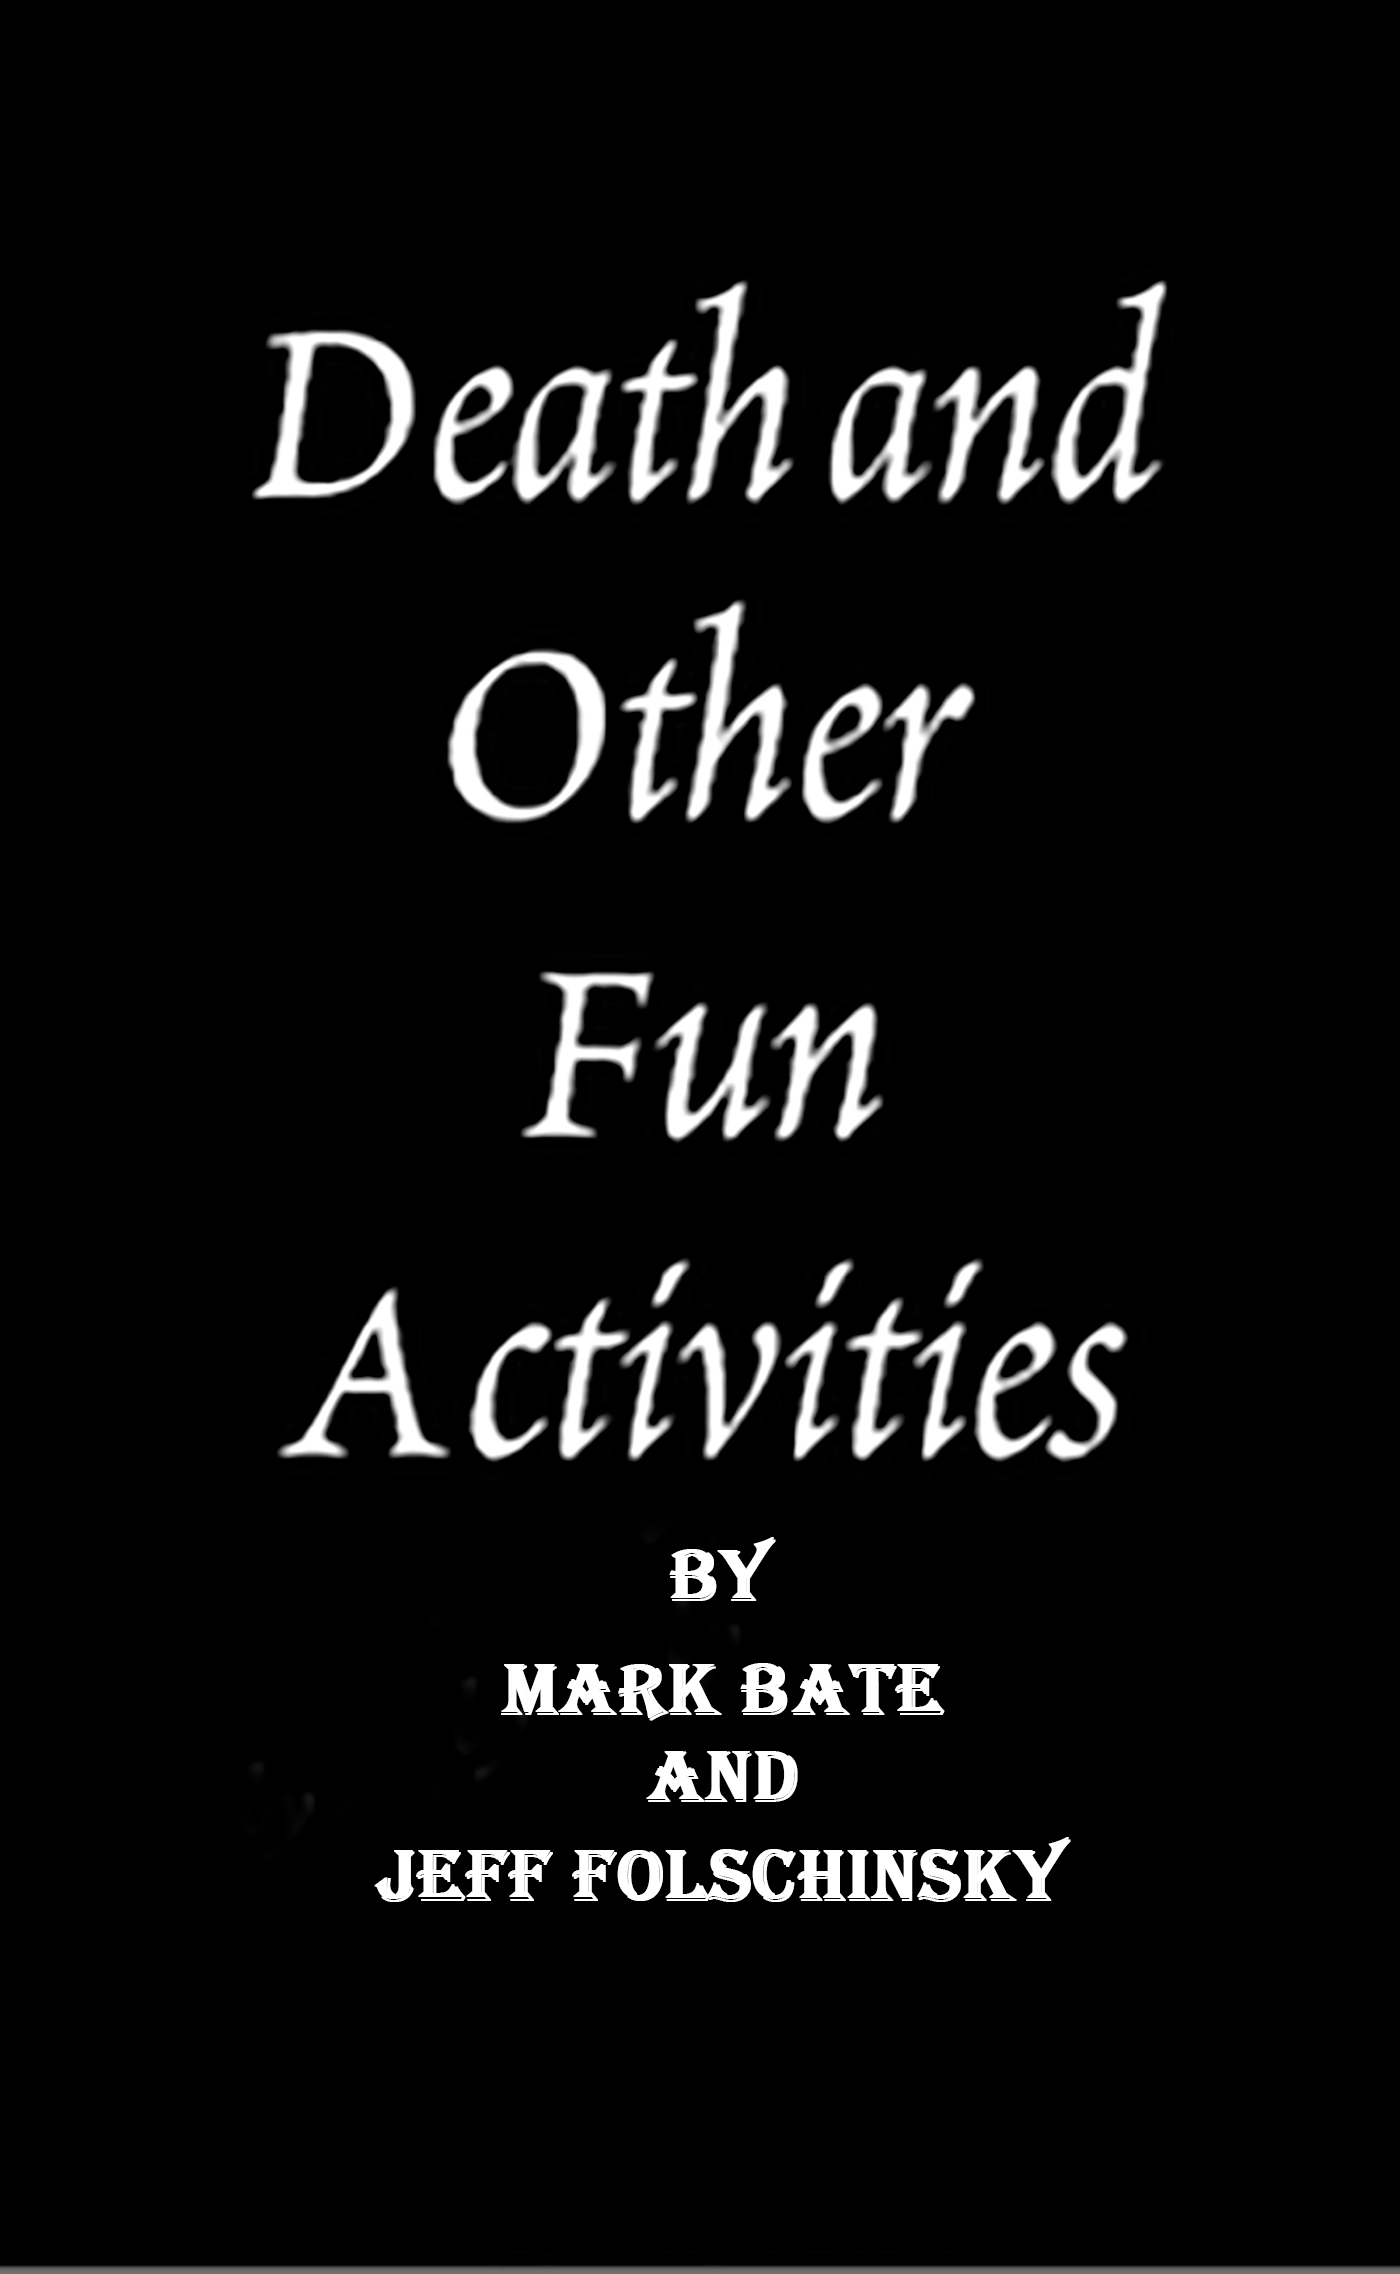 Death and Other Fun Activities